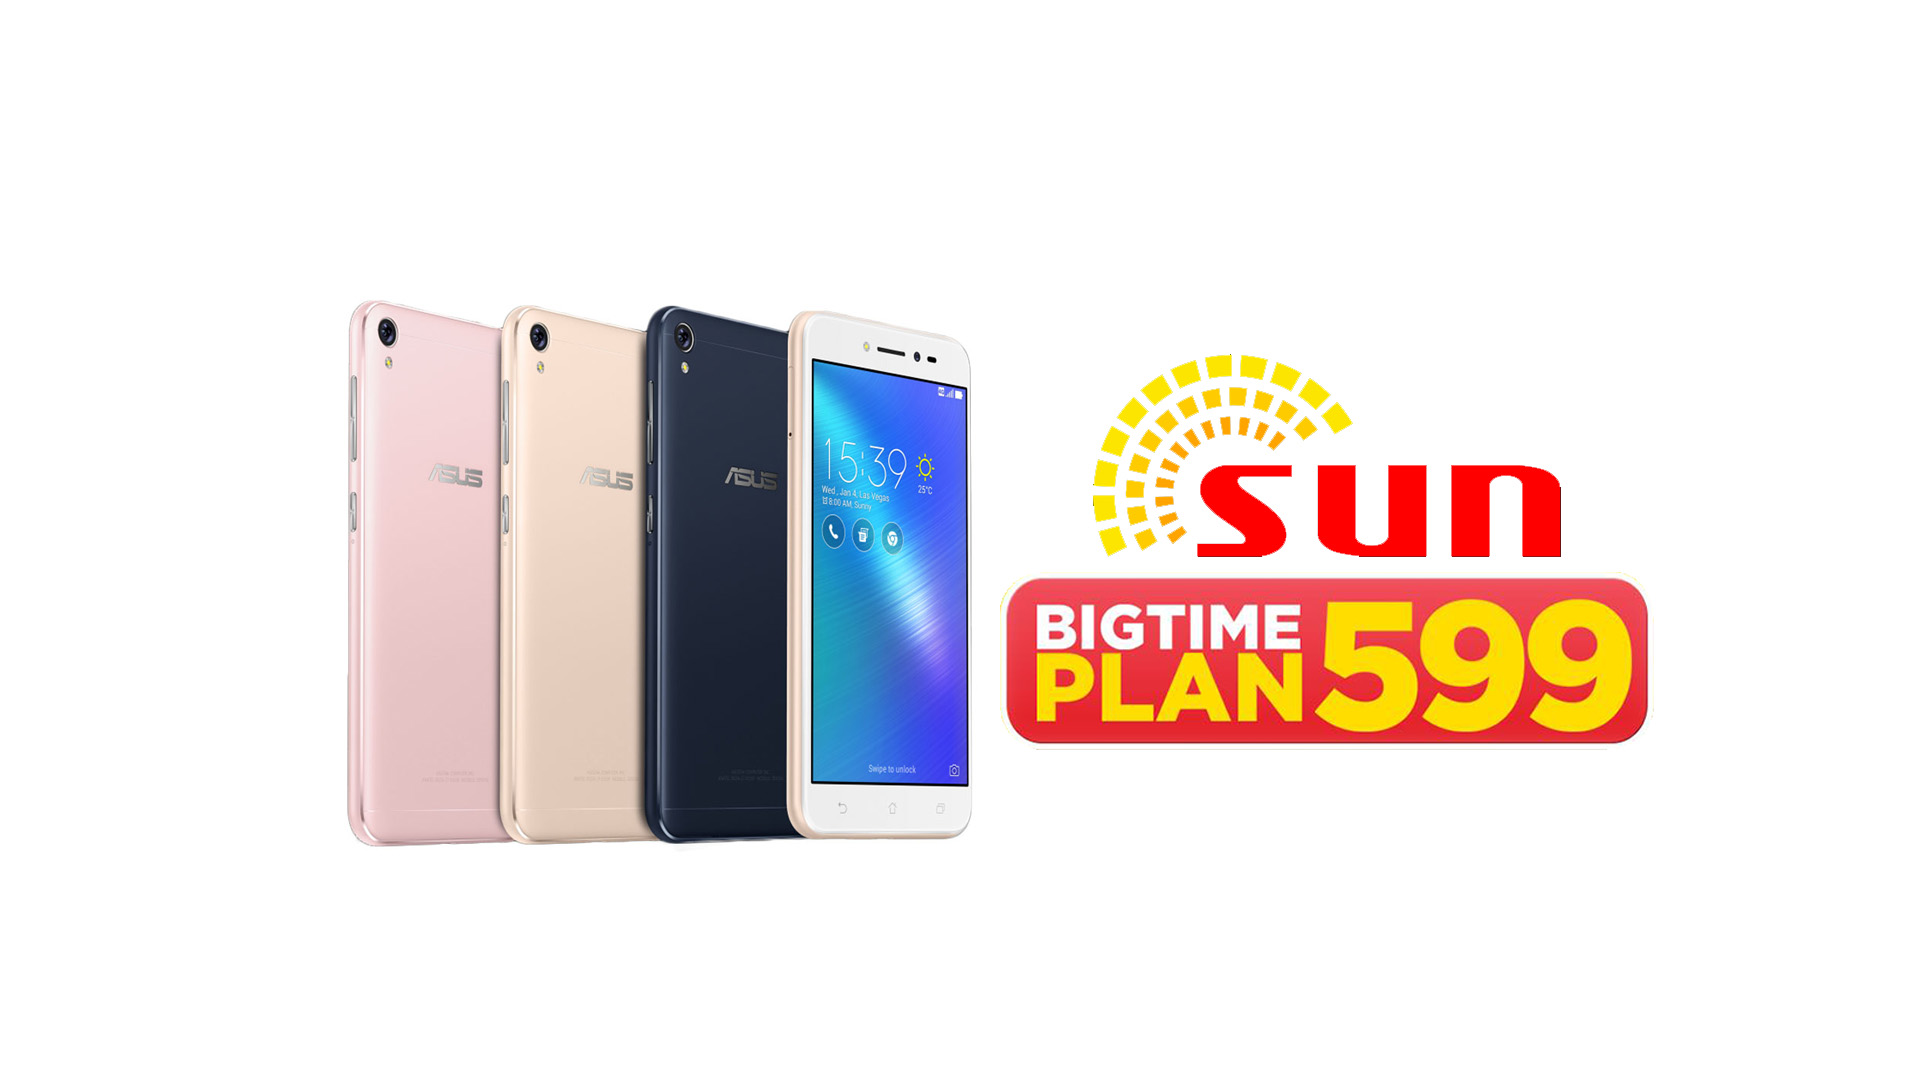 Zenfone Live, Now Free at SUN Bigtime Plan 599